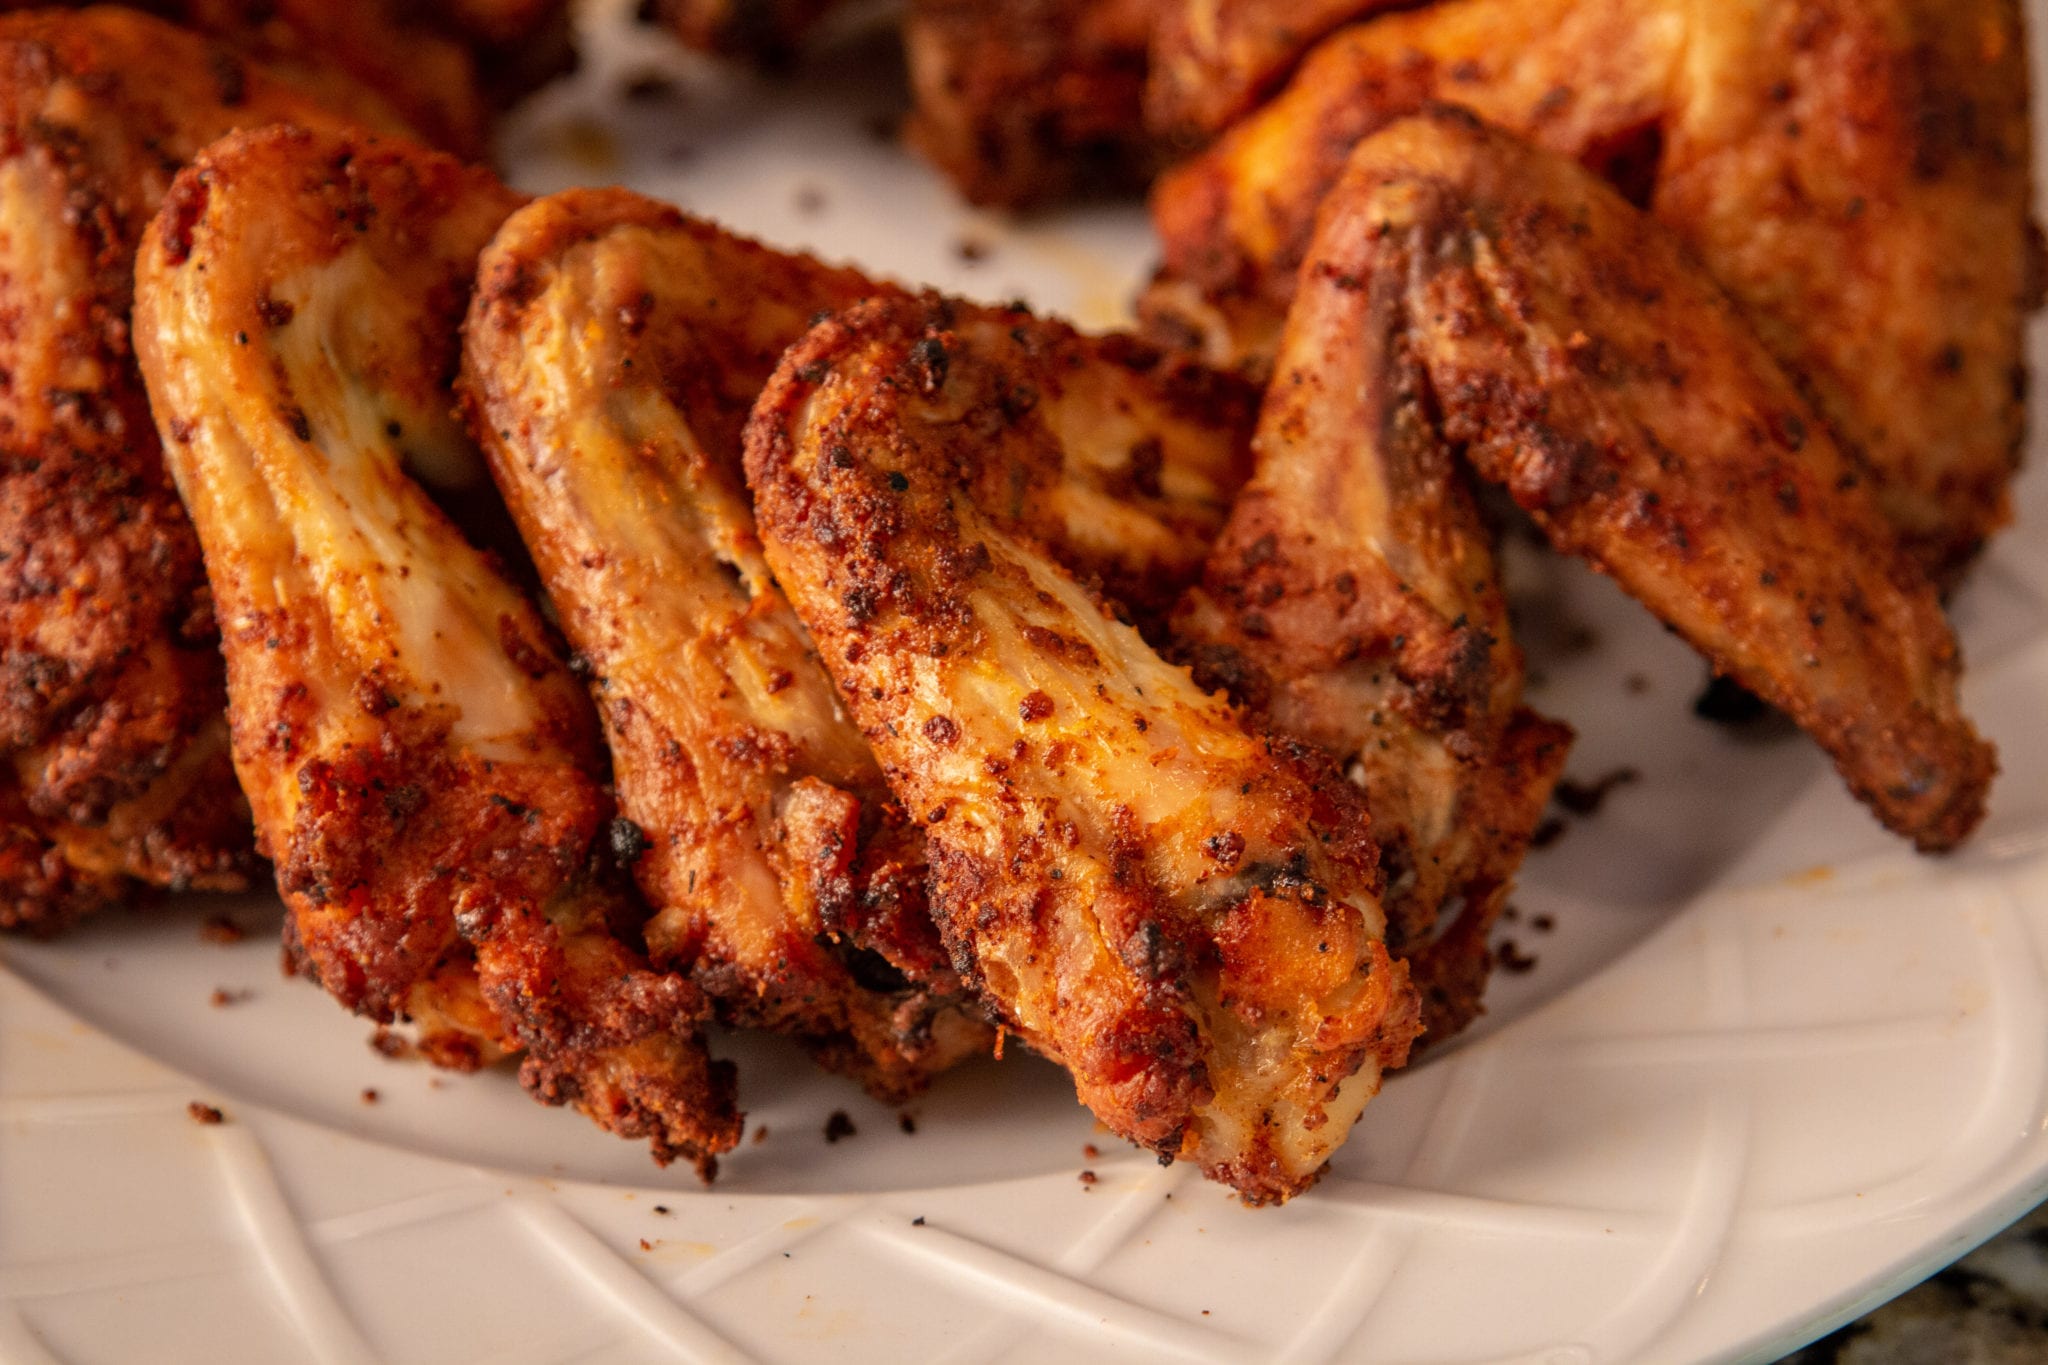 Easy Baked Chicken Wing Recipe Make Crispy Wings In The Oven